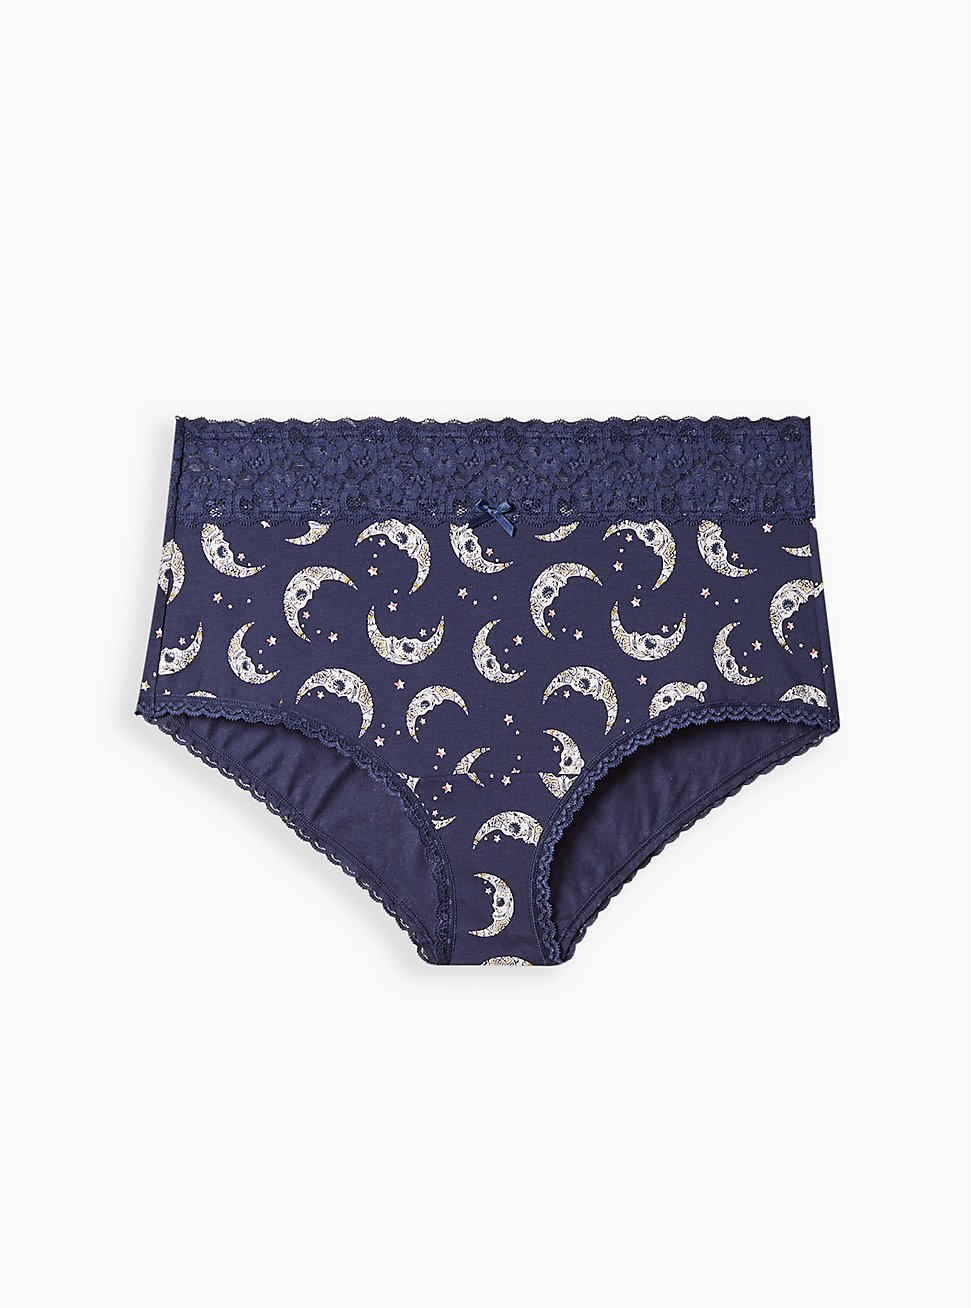 Plus Size Wide Lace Cotton Brief Panty - Navy Moons , MUERTOS MOONS- Navy, hi-res